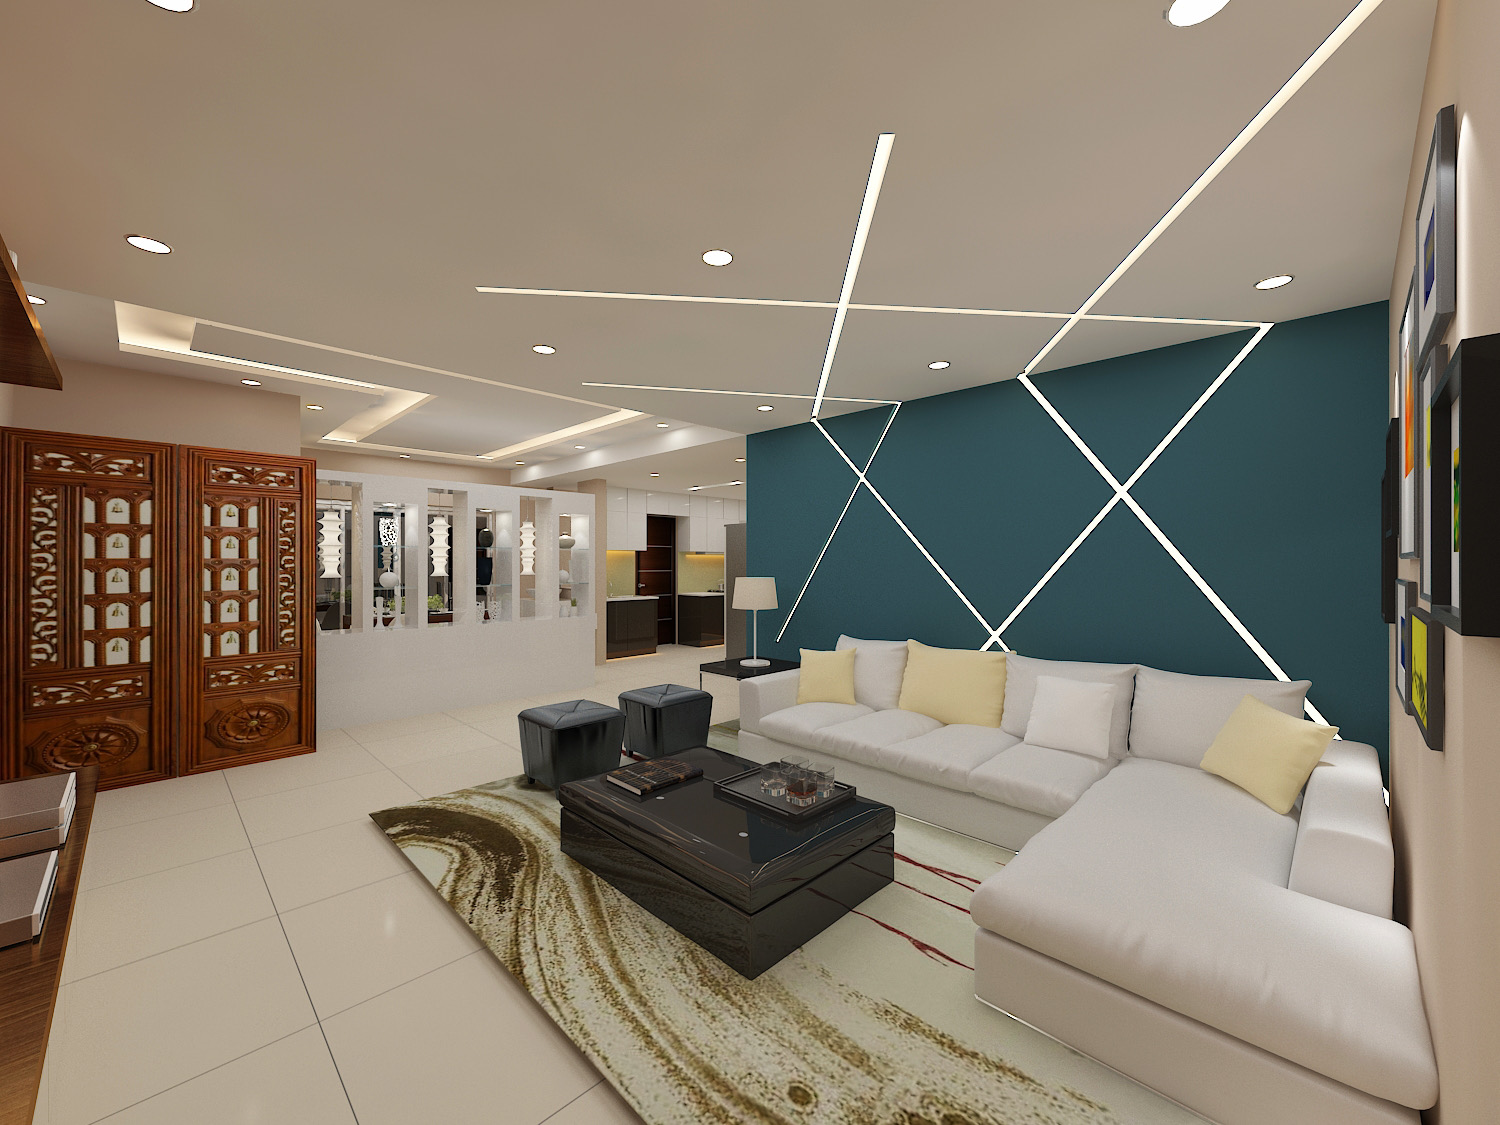 Living Area Design With Wall Decor